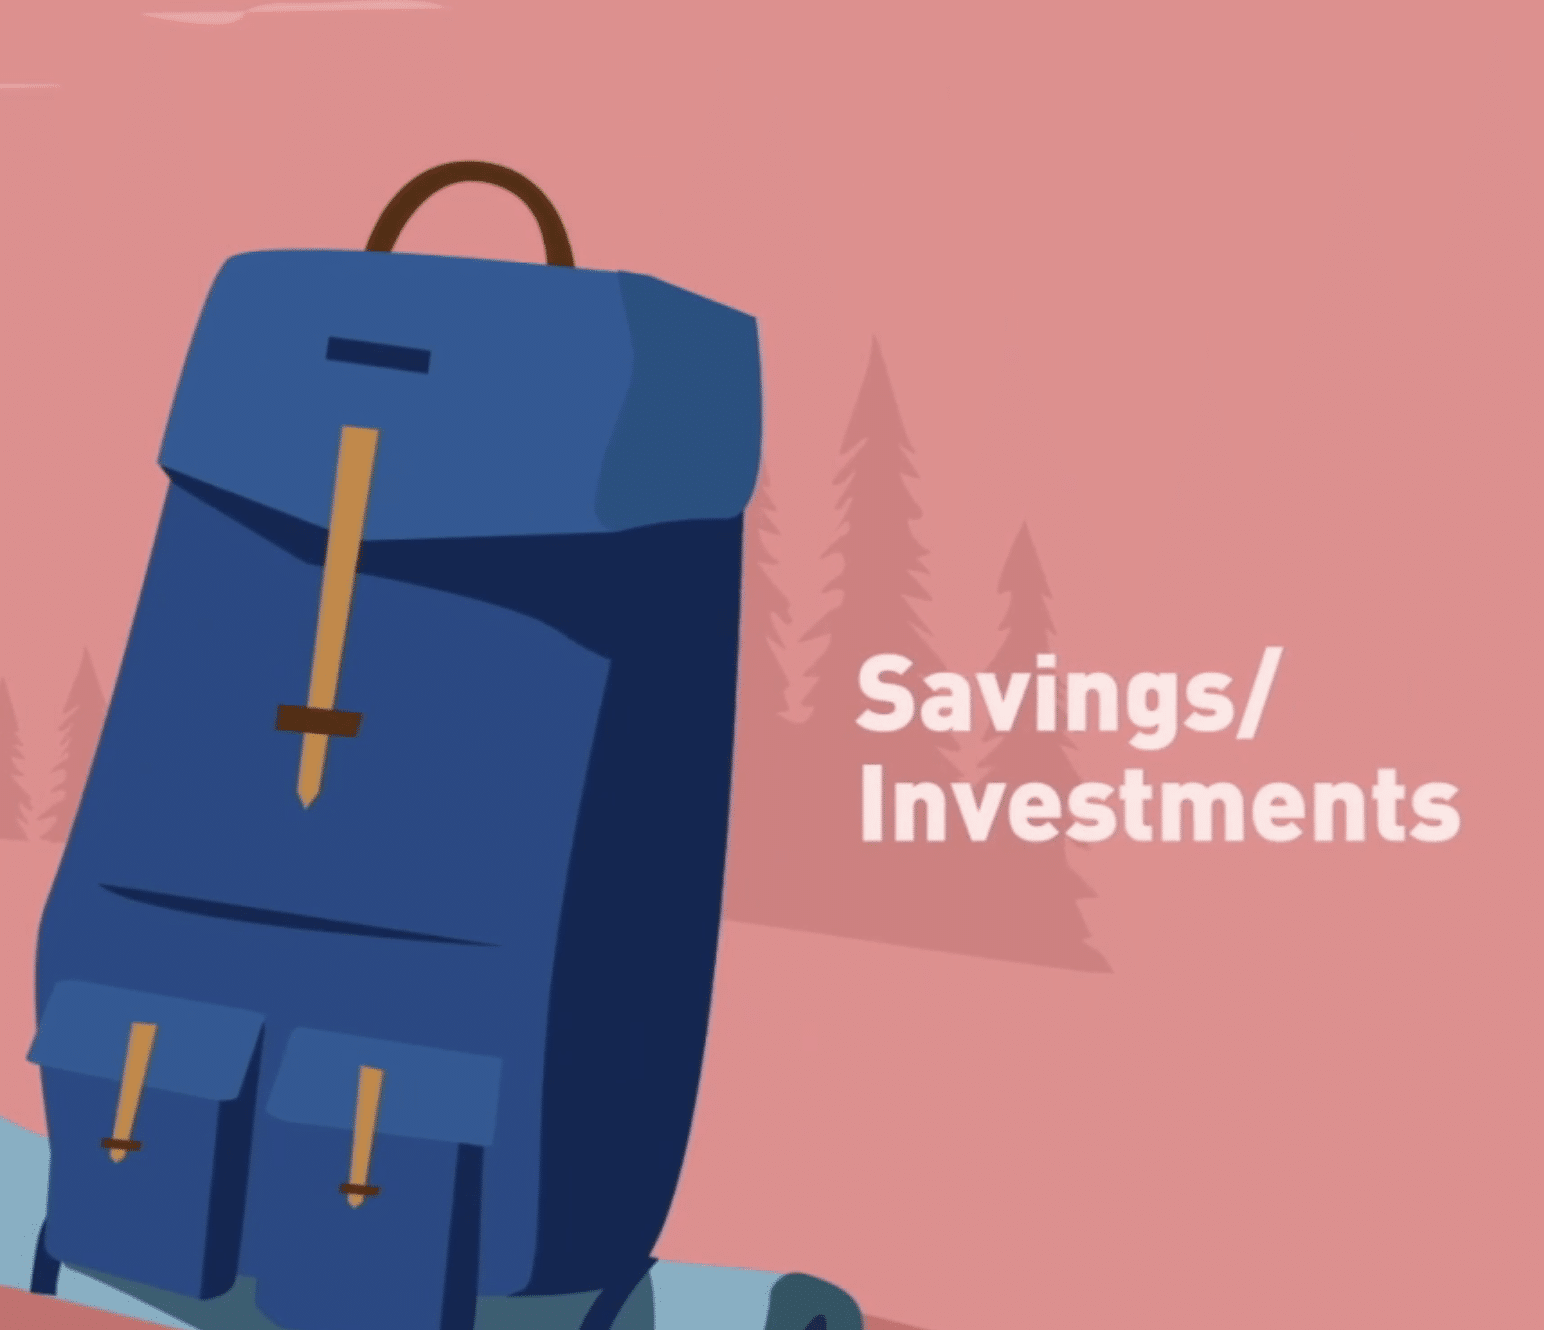 Animation for Lincoln Financial with savings/investment graphics.